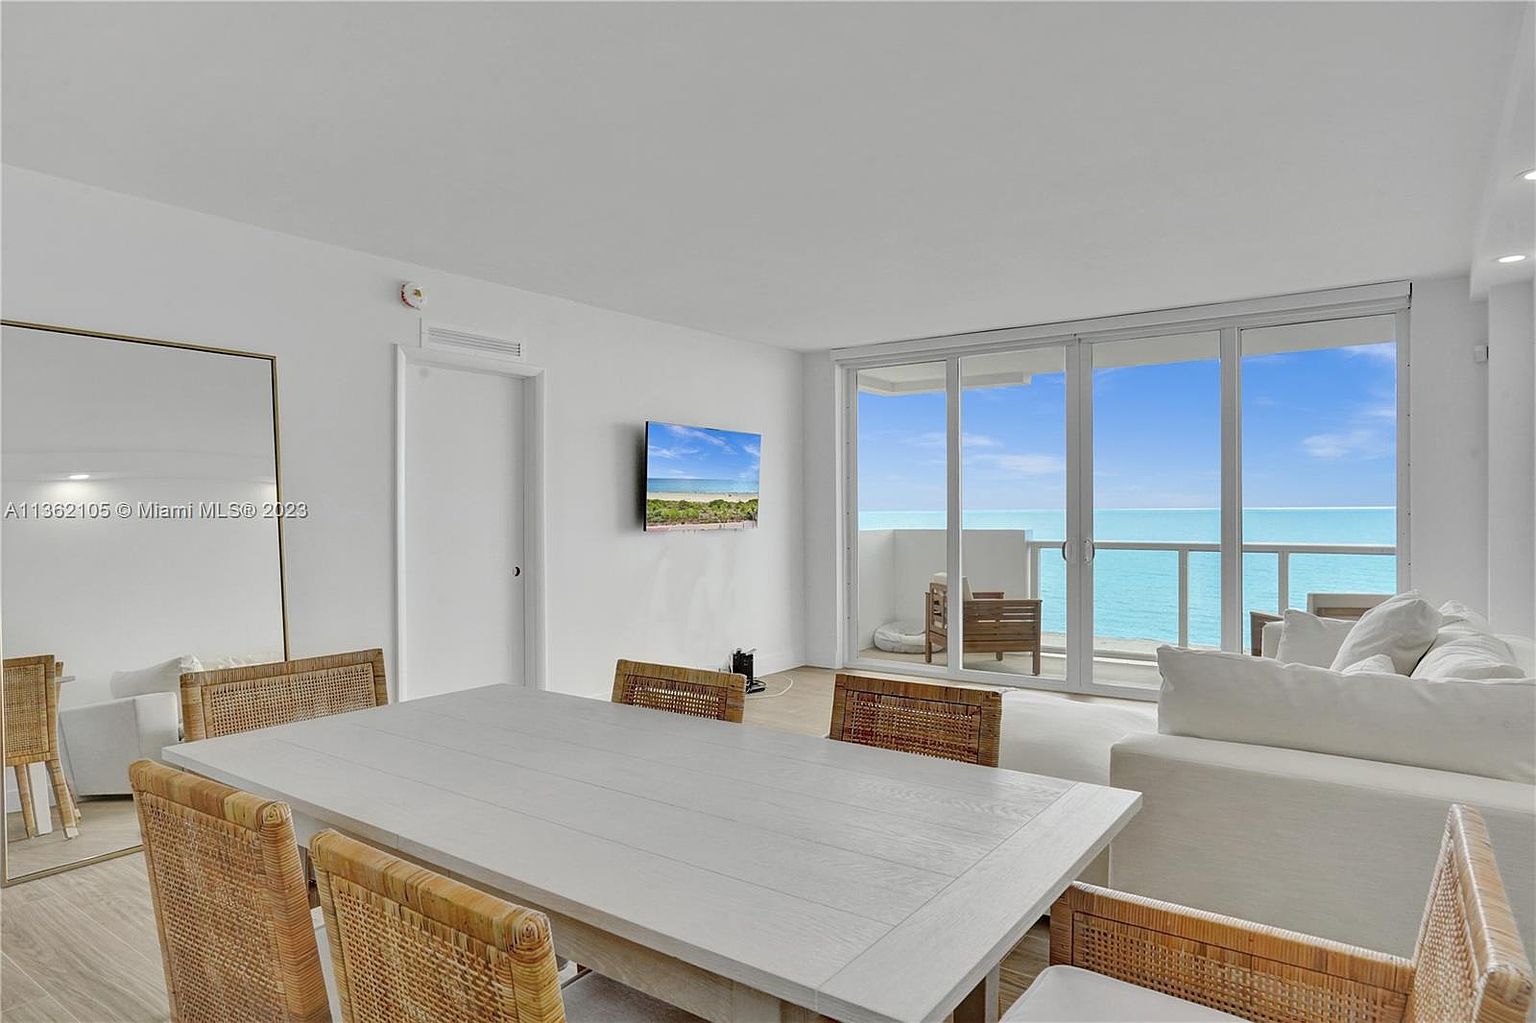 5601 Collins Ave Miami Beach, FL, 33140 - Apartments for Rent | Zillow